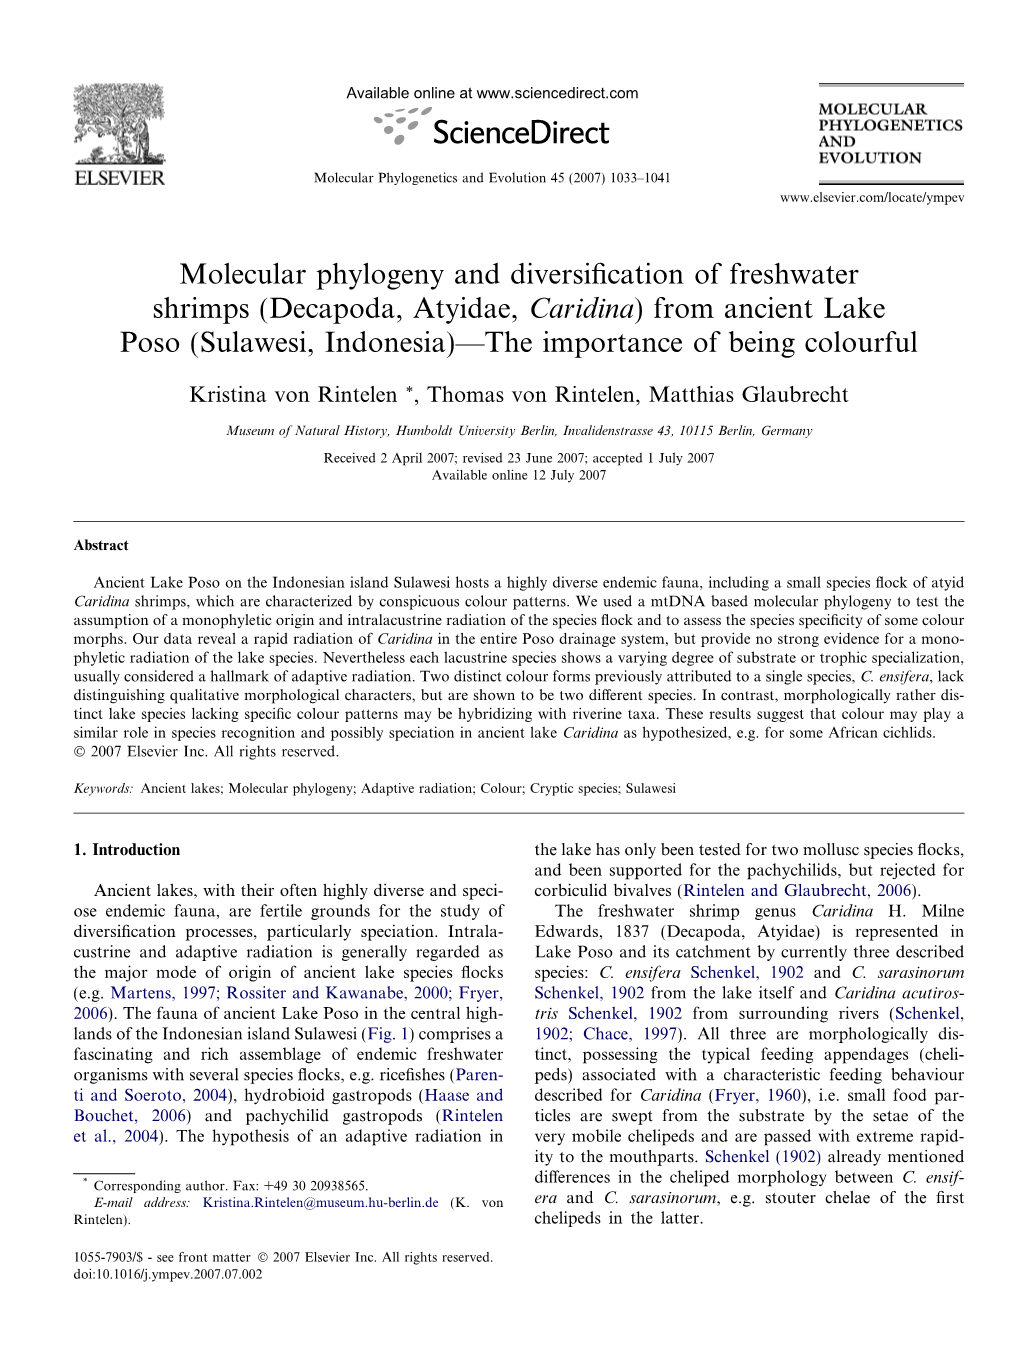 Molecular Phylogeny and Diversification of Freshwater Shrimps